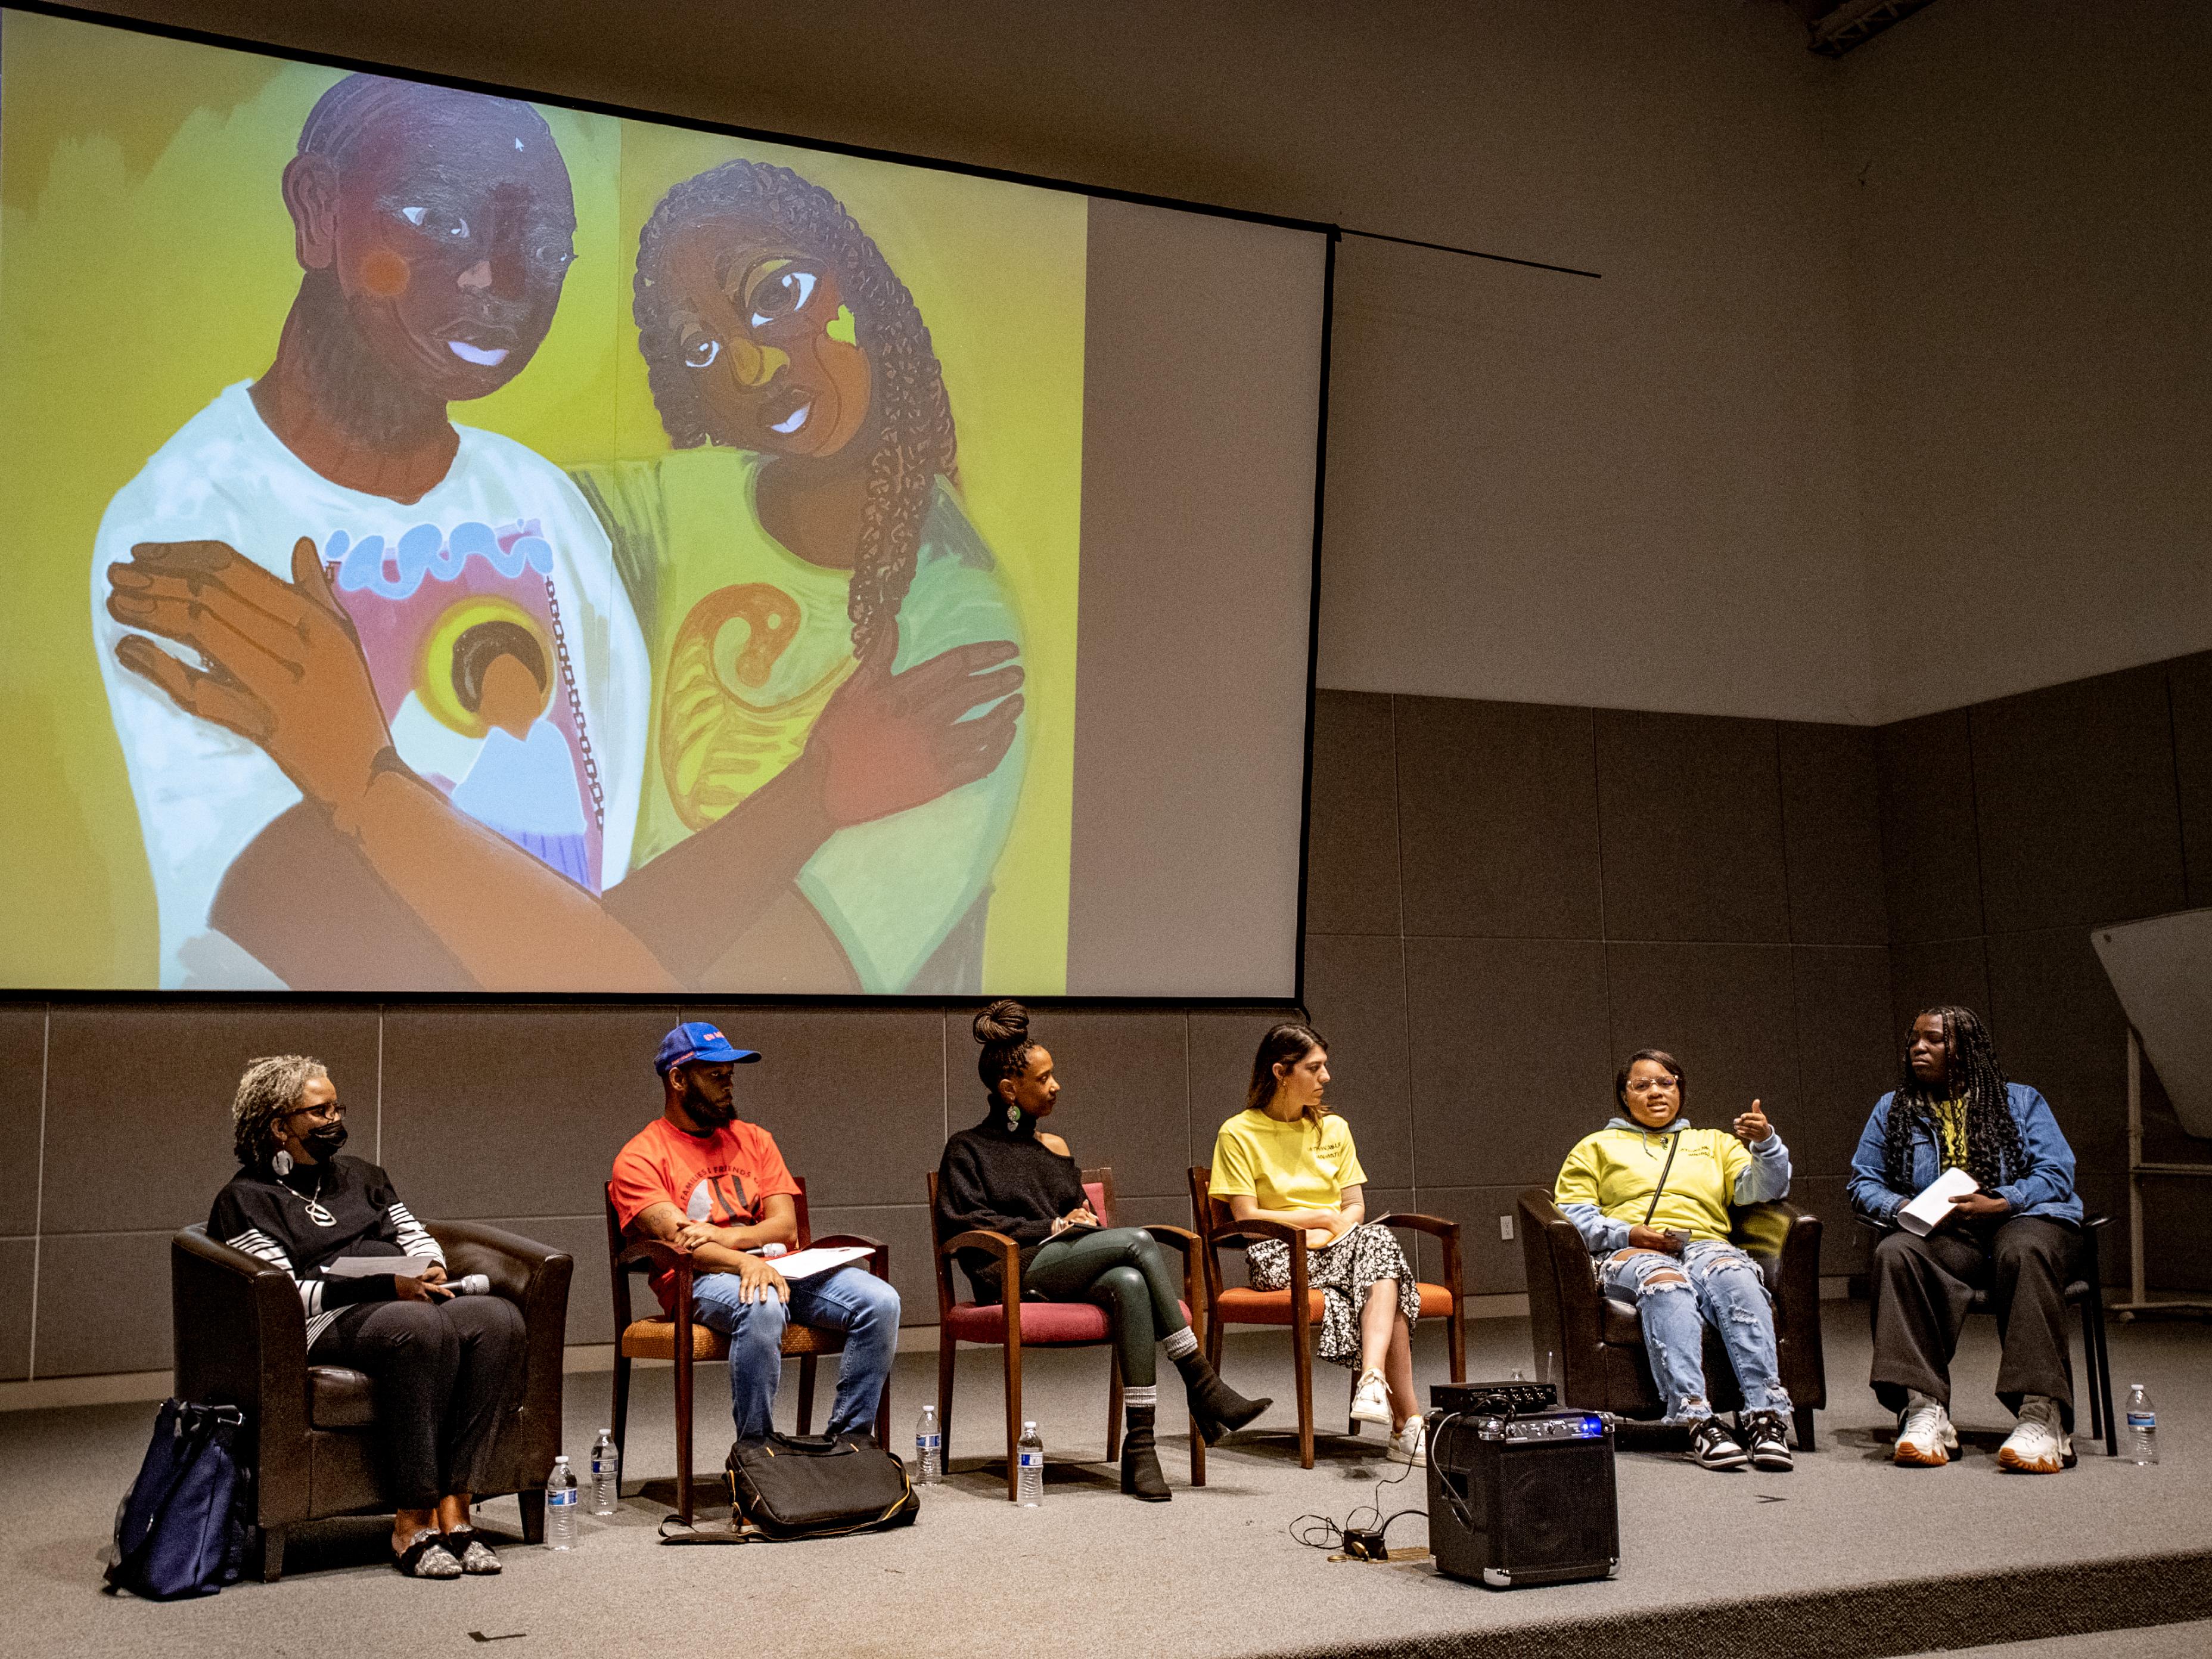 Panelists discuss the current juvenile justice crisis and how the exhibition came to be. A detailed image of ‘Together, Towards Freedom,’ a mural in the exhibit created by Langston Allston and youth from the Young Artist Movement, serves as the backdrop.